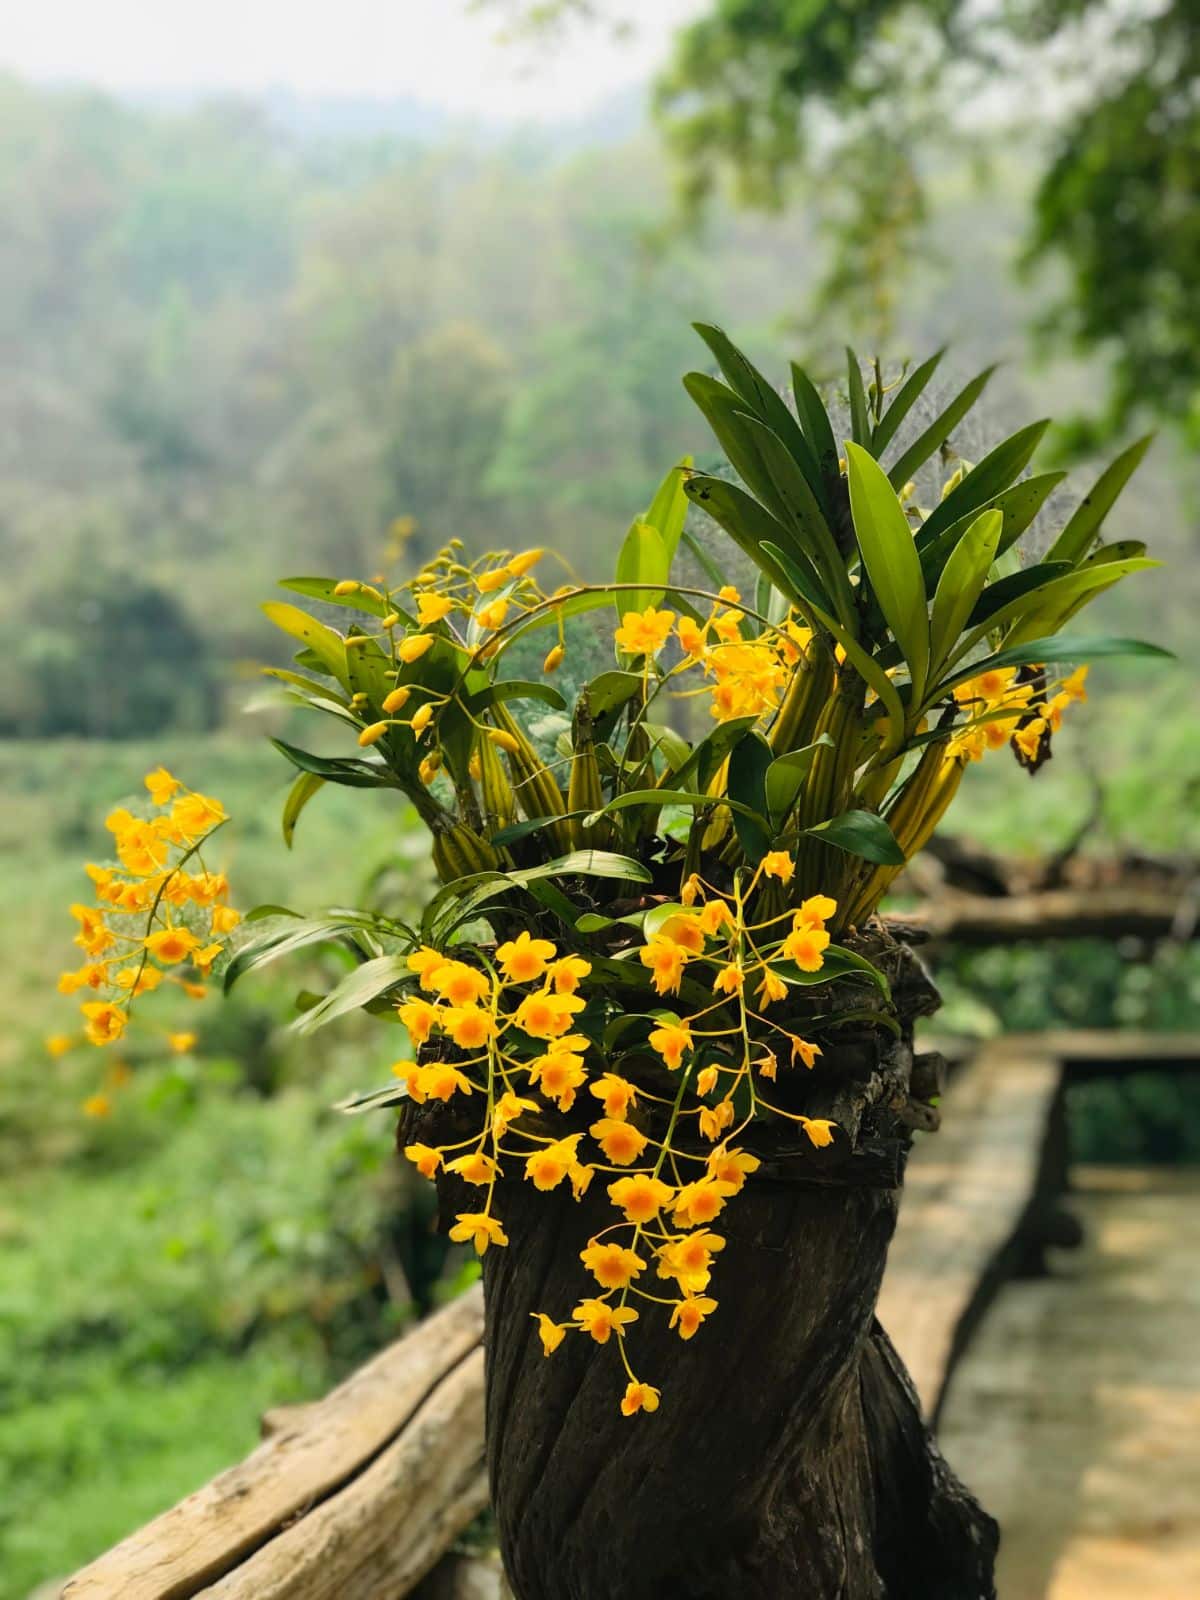 Dendrobium orchid with small bright yellow blooms